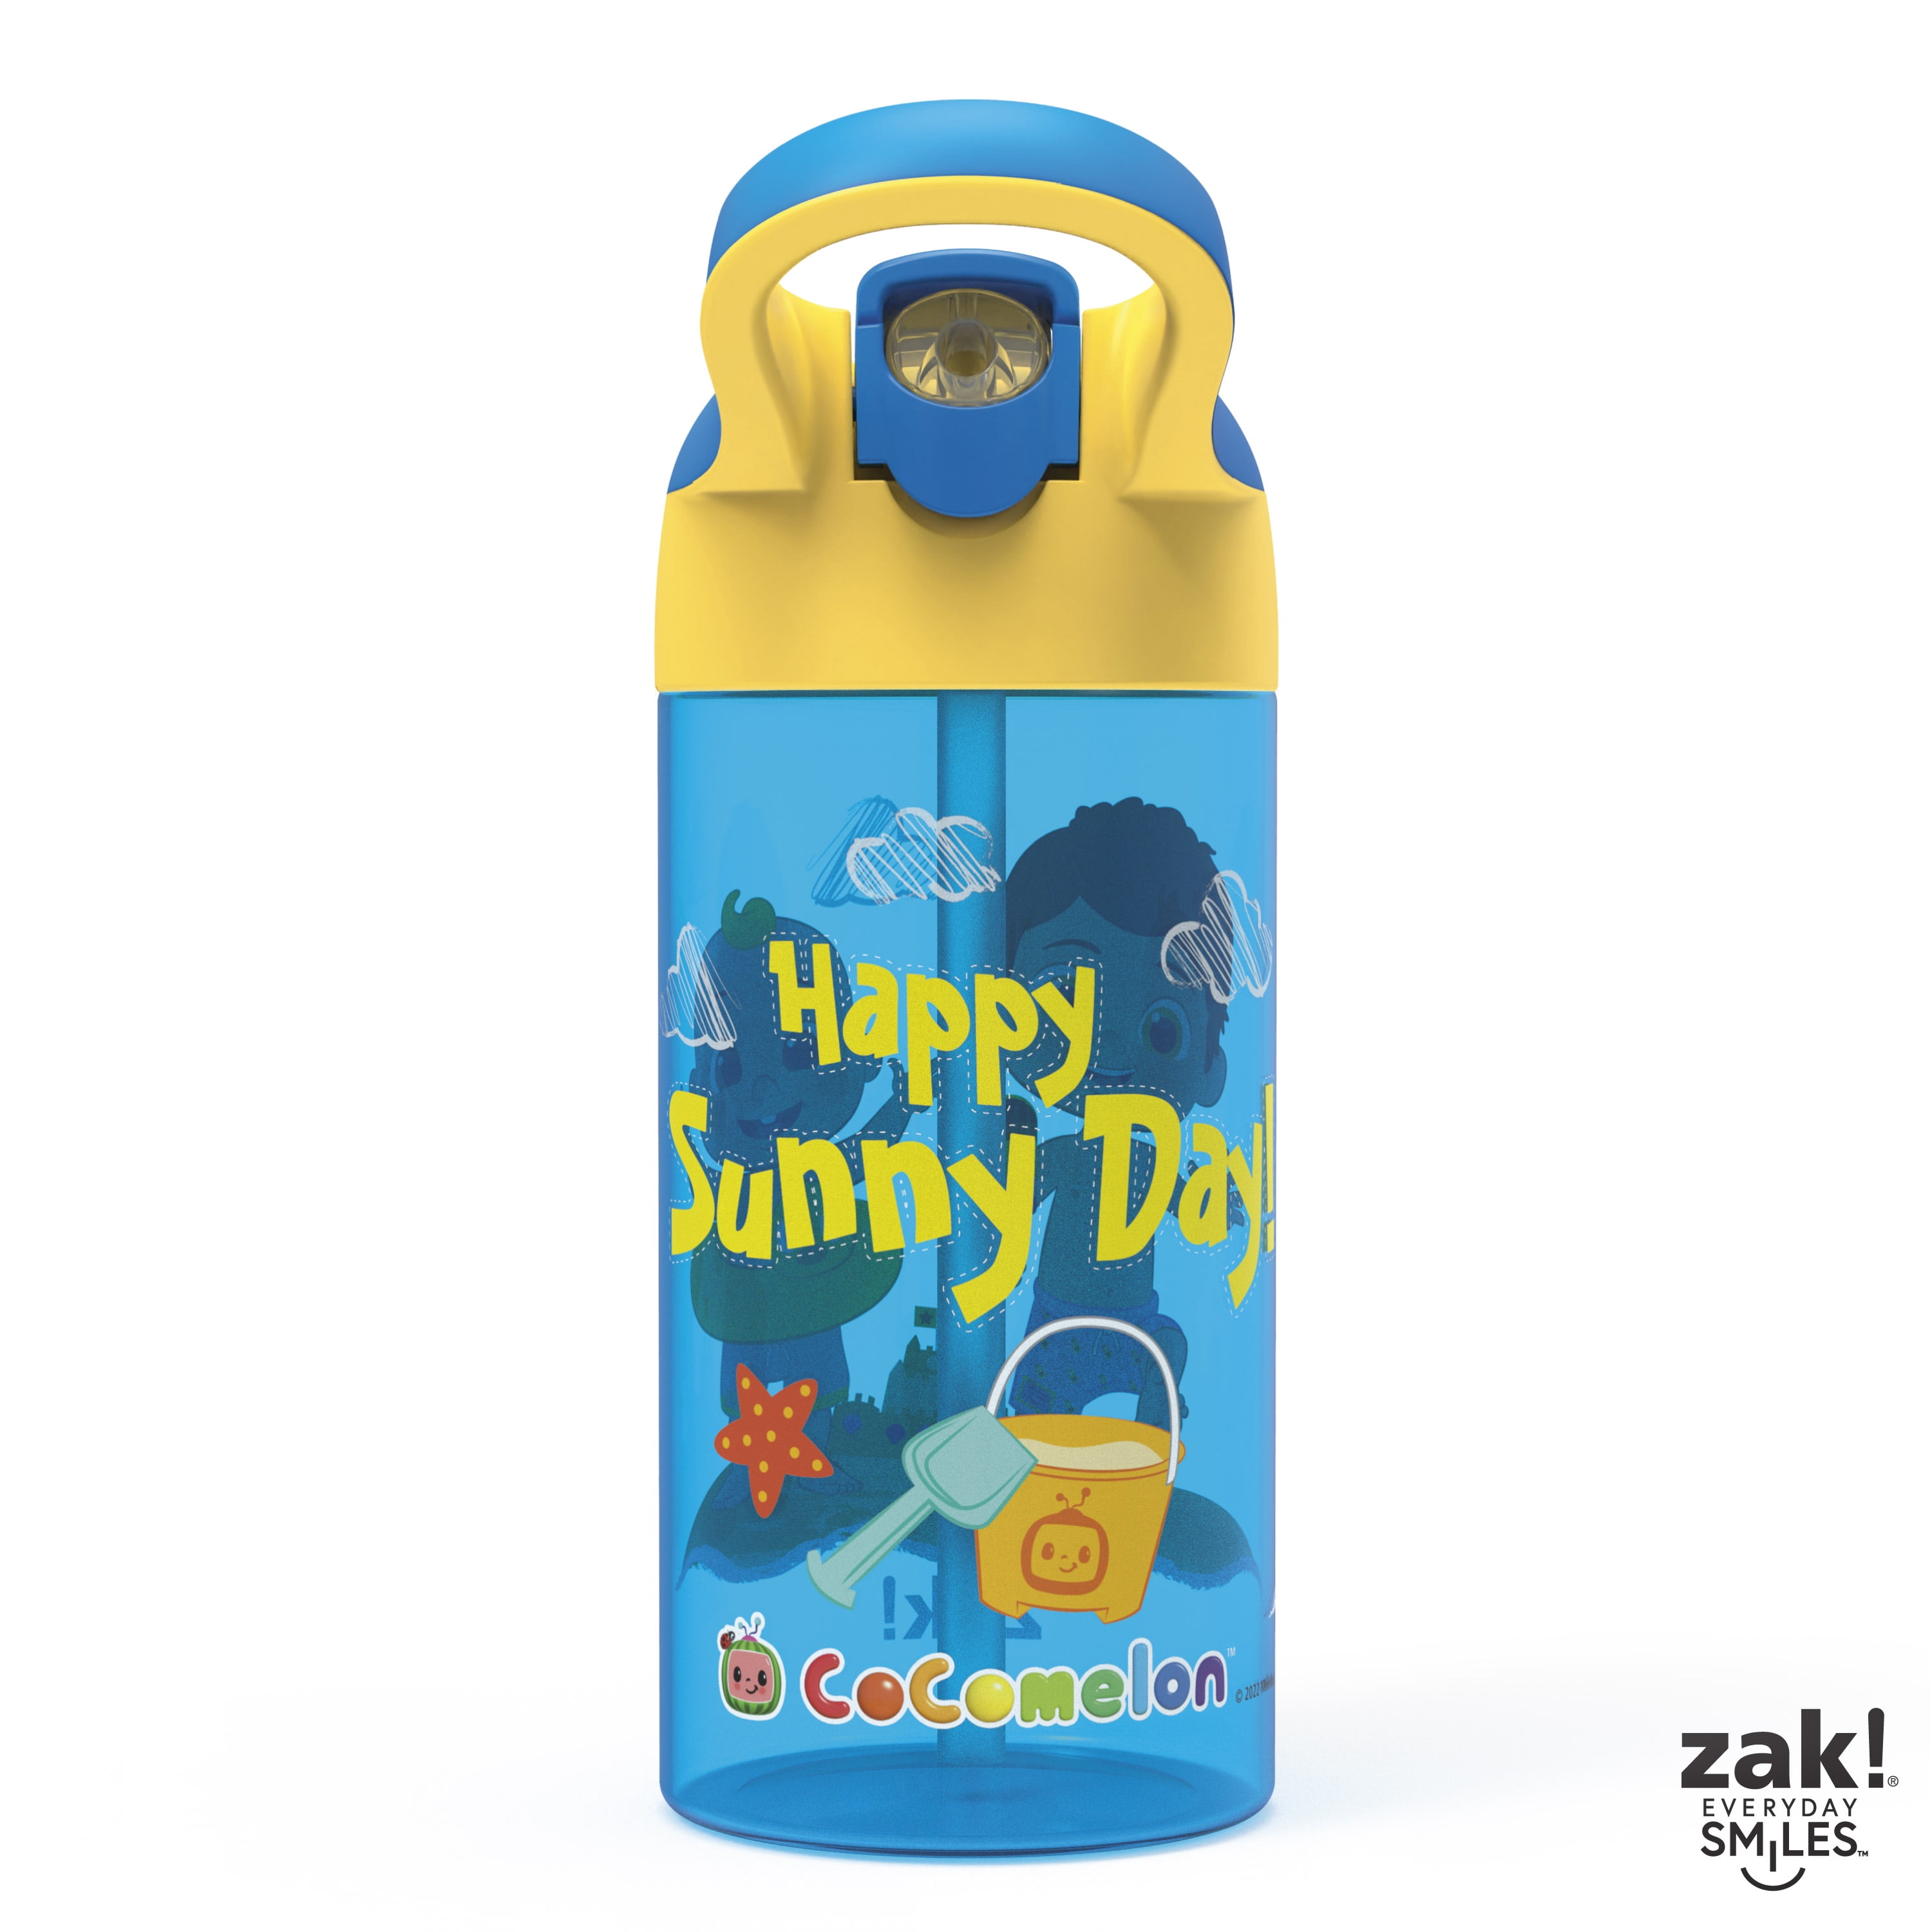 Zak Designs Blippi Kids Water Bottle with Spout Cover and Built-in Carrying  Loop, Made of Durable Pl…See more Zak Designs Blippi Kids Water Bottle